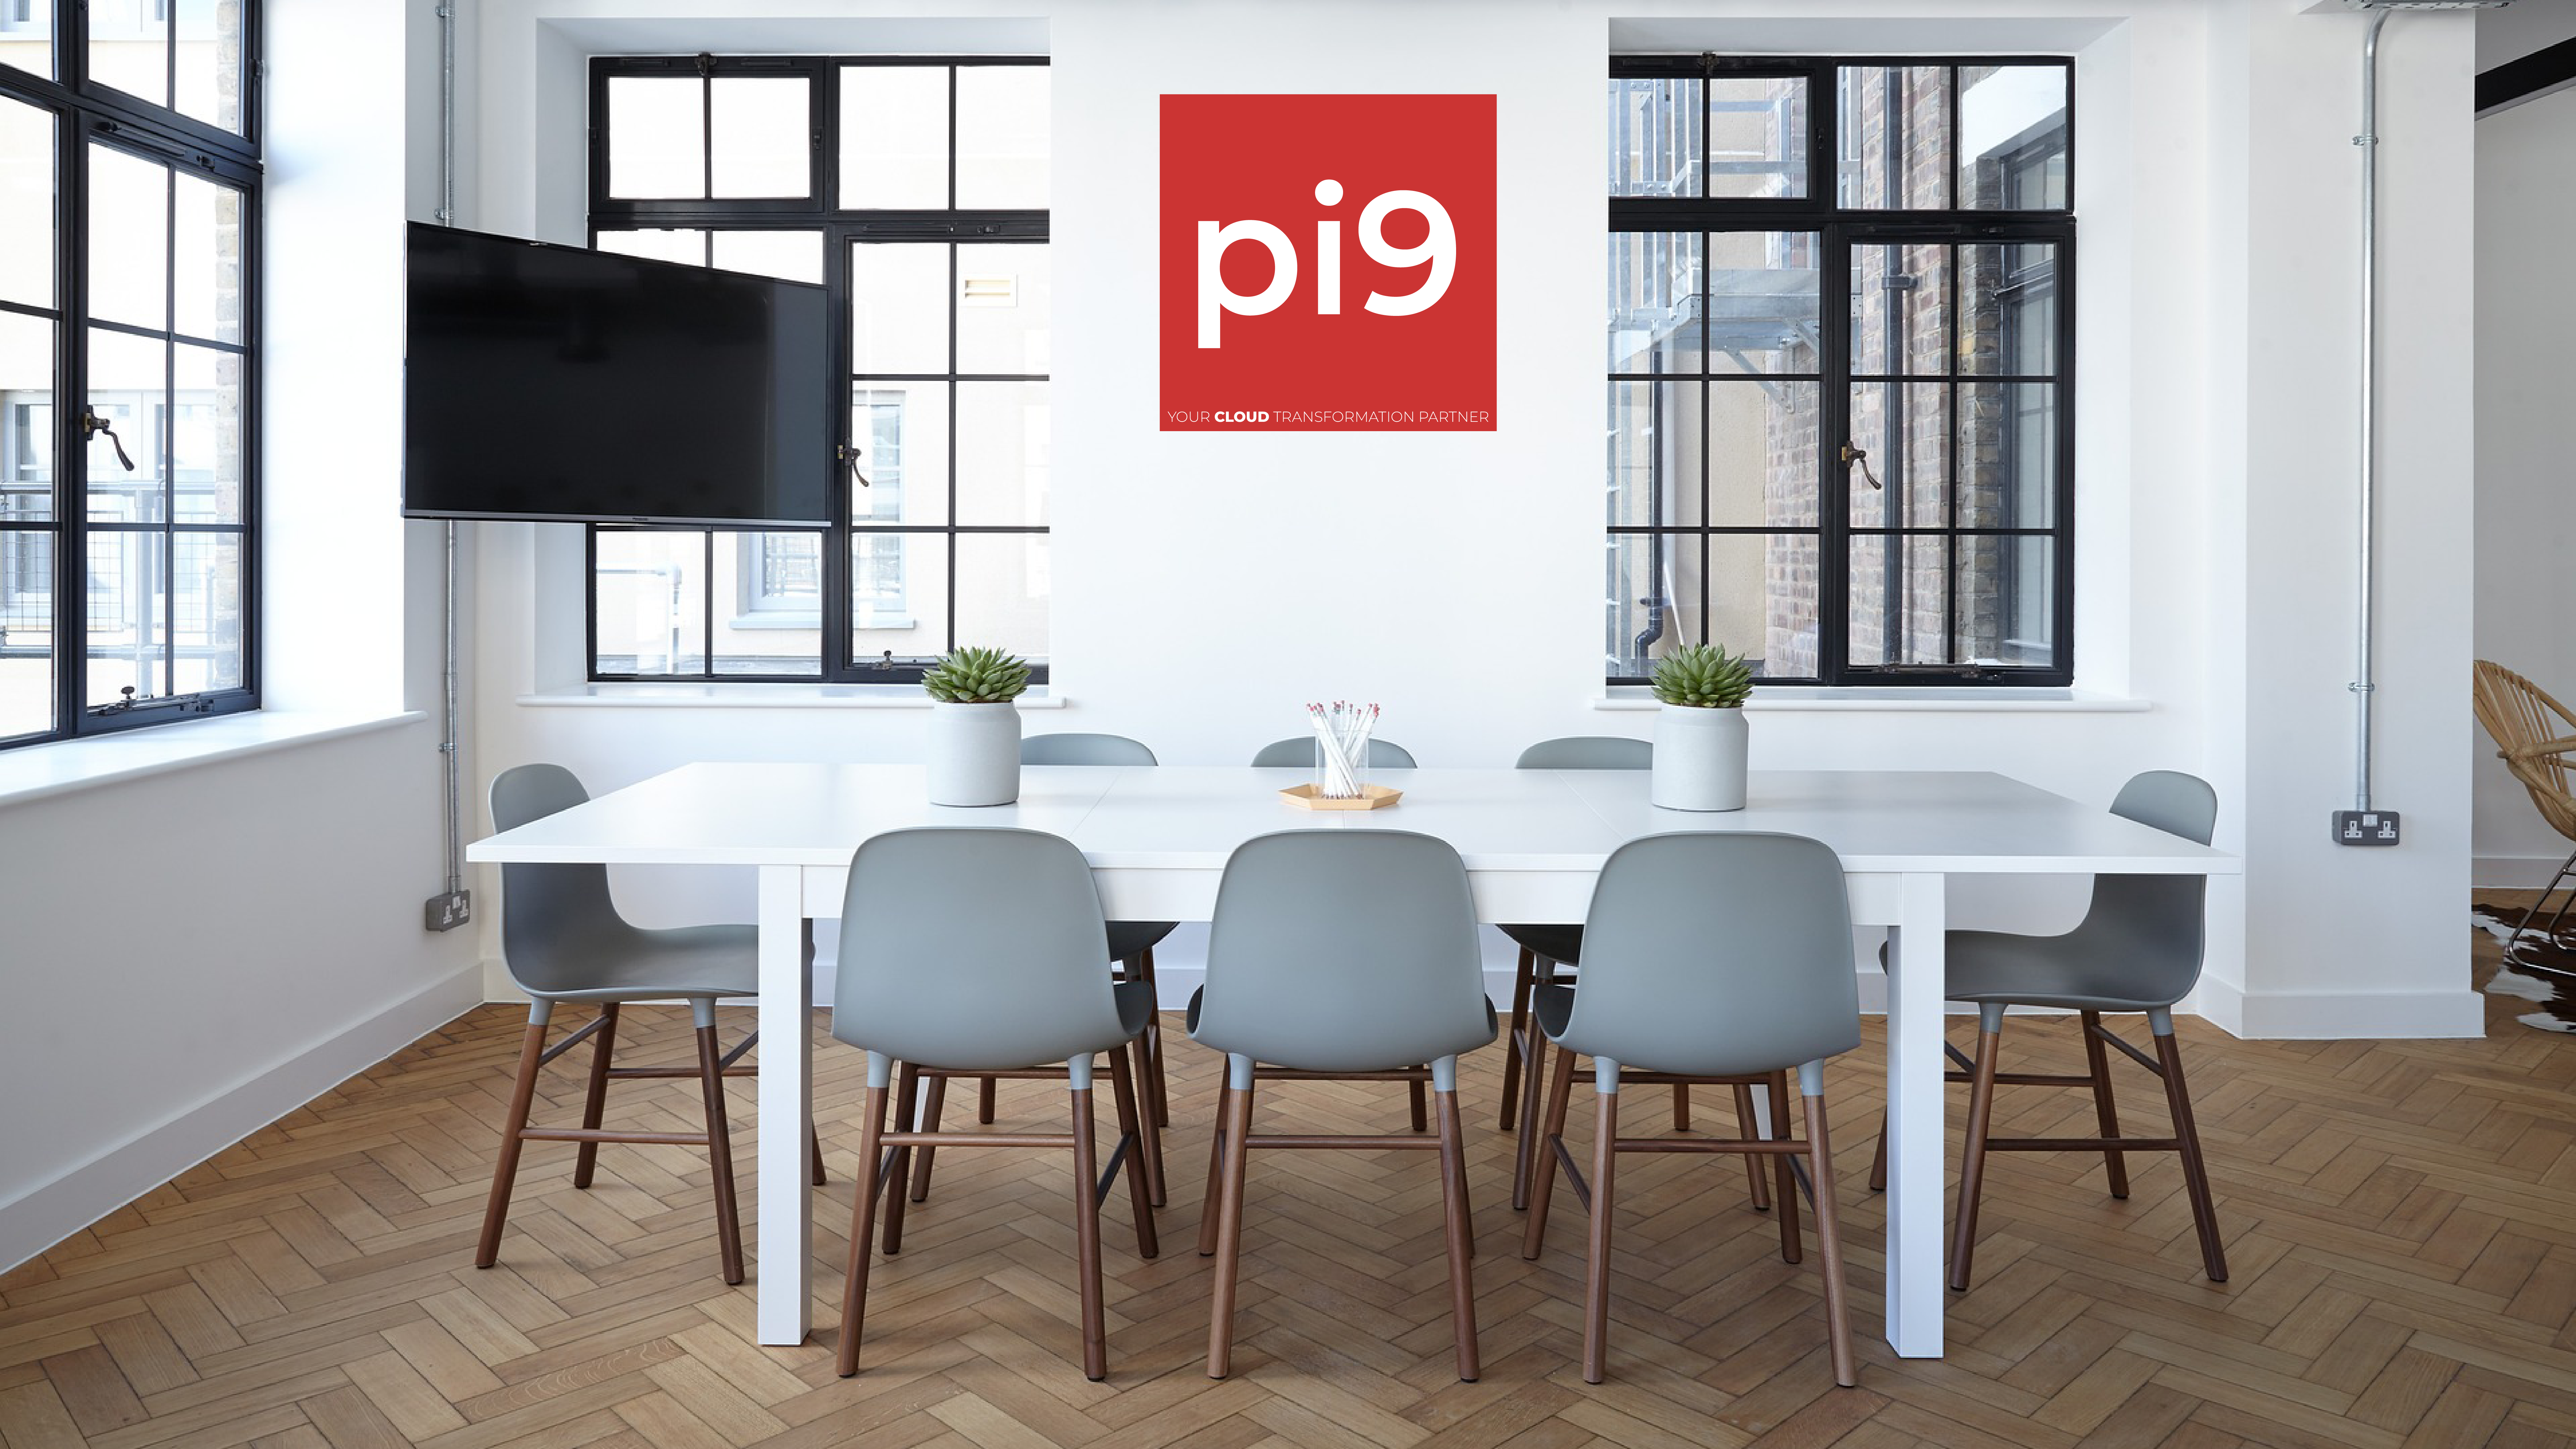 Welcome to Pi9 – Your Cloud Transformation Partner